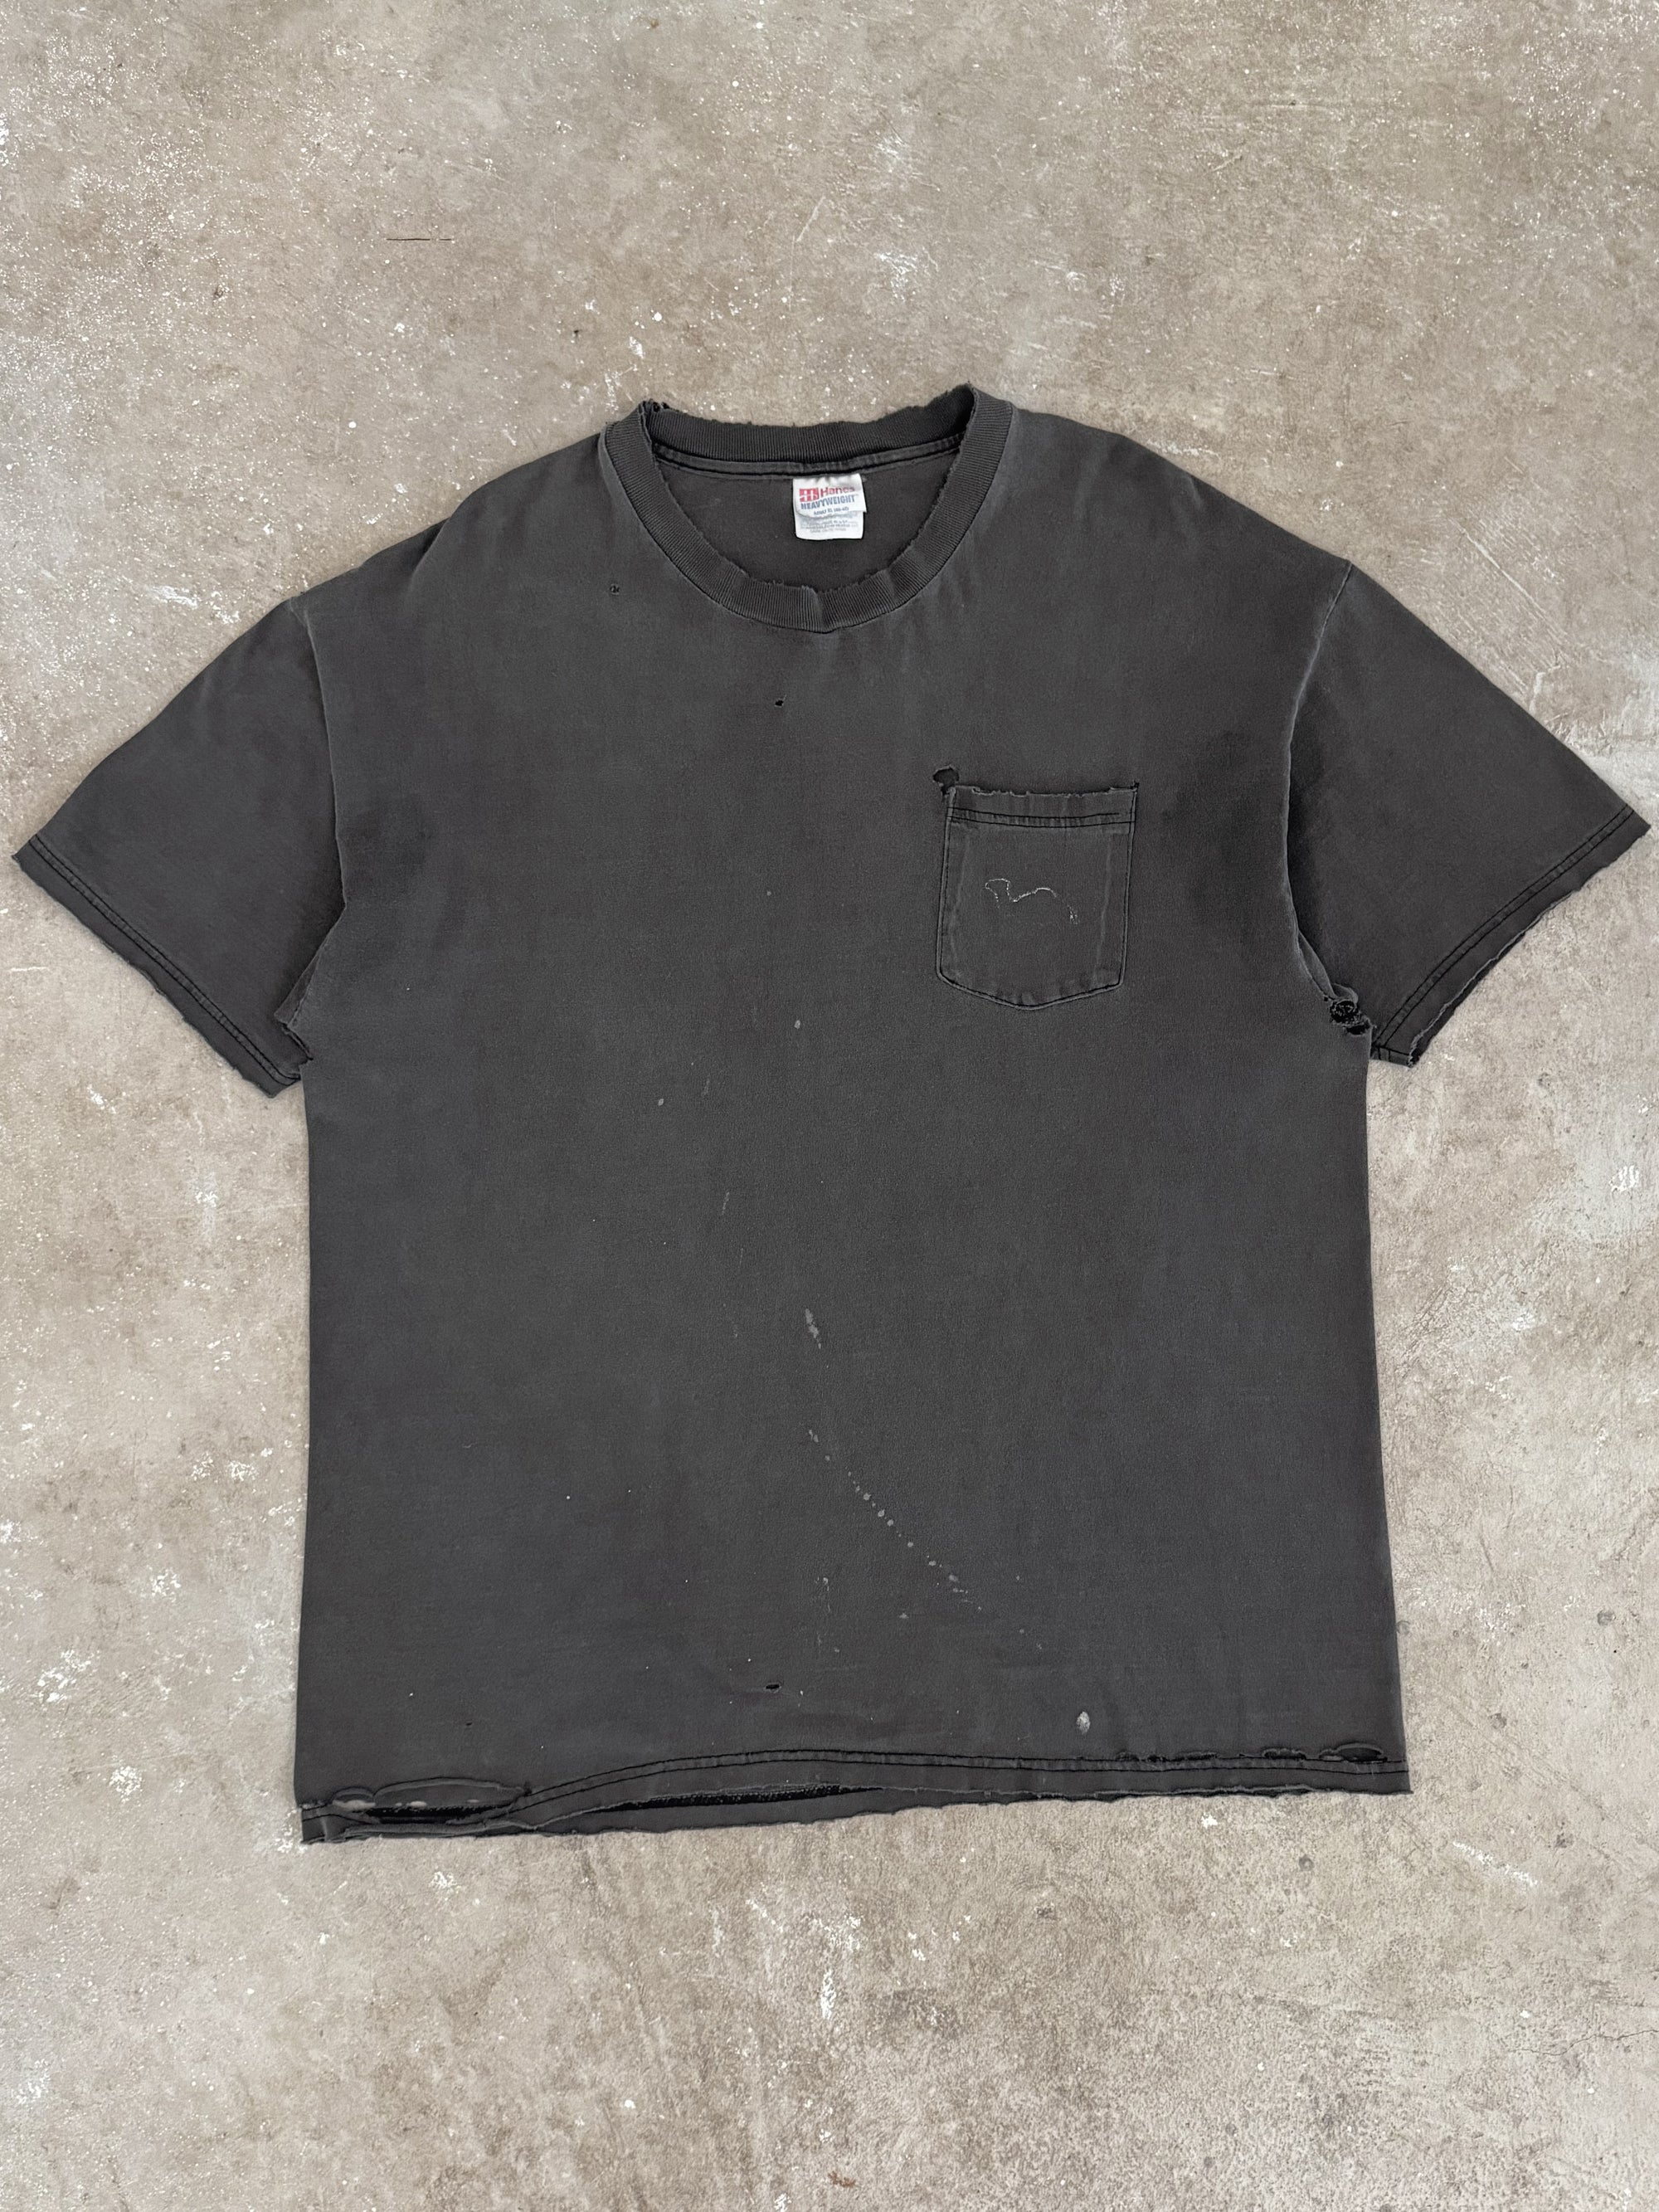 1990s "Camel" Distressed Faded Pocket Tee (XL)